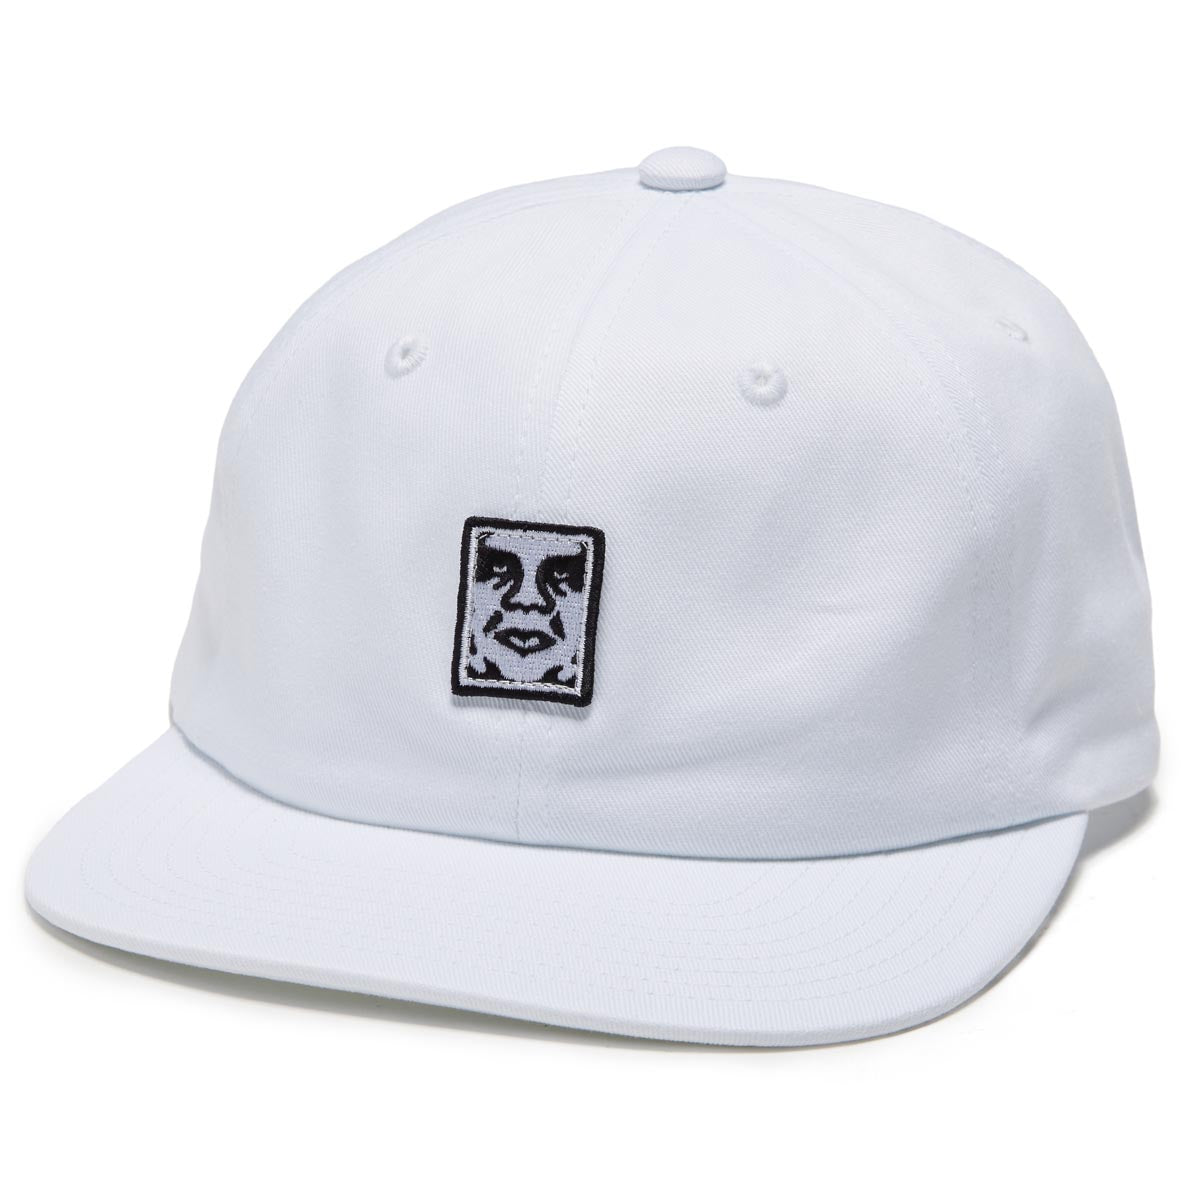 Obey Icon Patch Panel Strapback Hat - White image 1